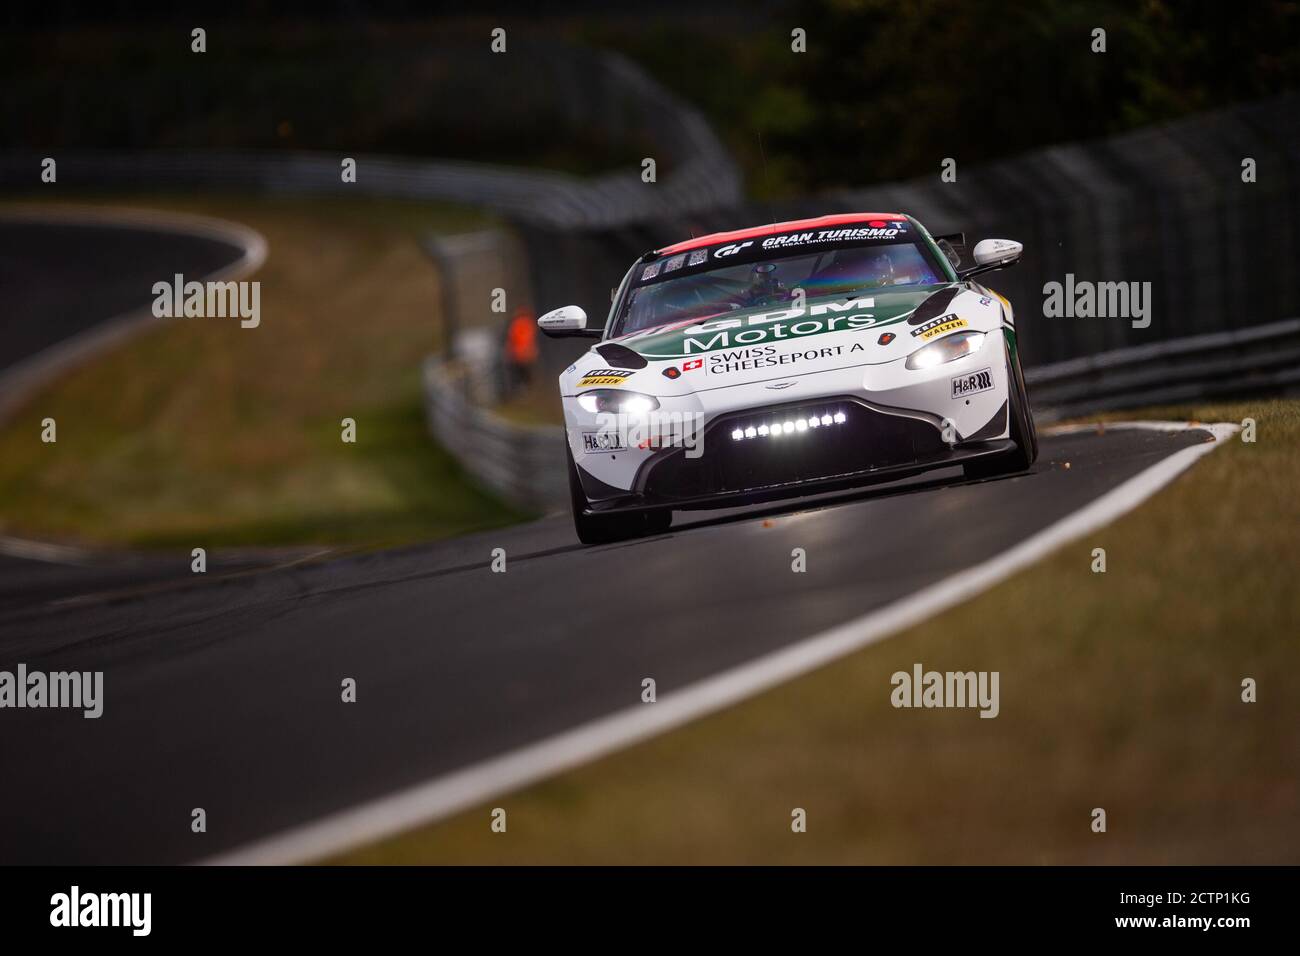 71 Dumarey Guido (bel), Walker Alexander (swi), Verdonck Nico (bel), Hess Michael (ger), Prosport-Racing GmbH, Aston Martin Vantage AMR GT4, action during the 2020 24 Hours of Nurburgring, on the N.rburgring Nordschleife, from September 24 to 27, 2020 in Nurburg, Germany - Photo Joao Filipe / DPPI Credit: LM/DPPI/Joao Filipe/Alamy Live News Stock Photo